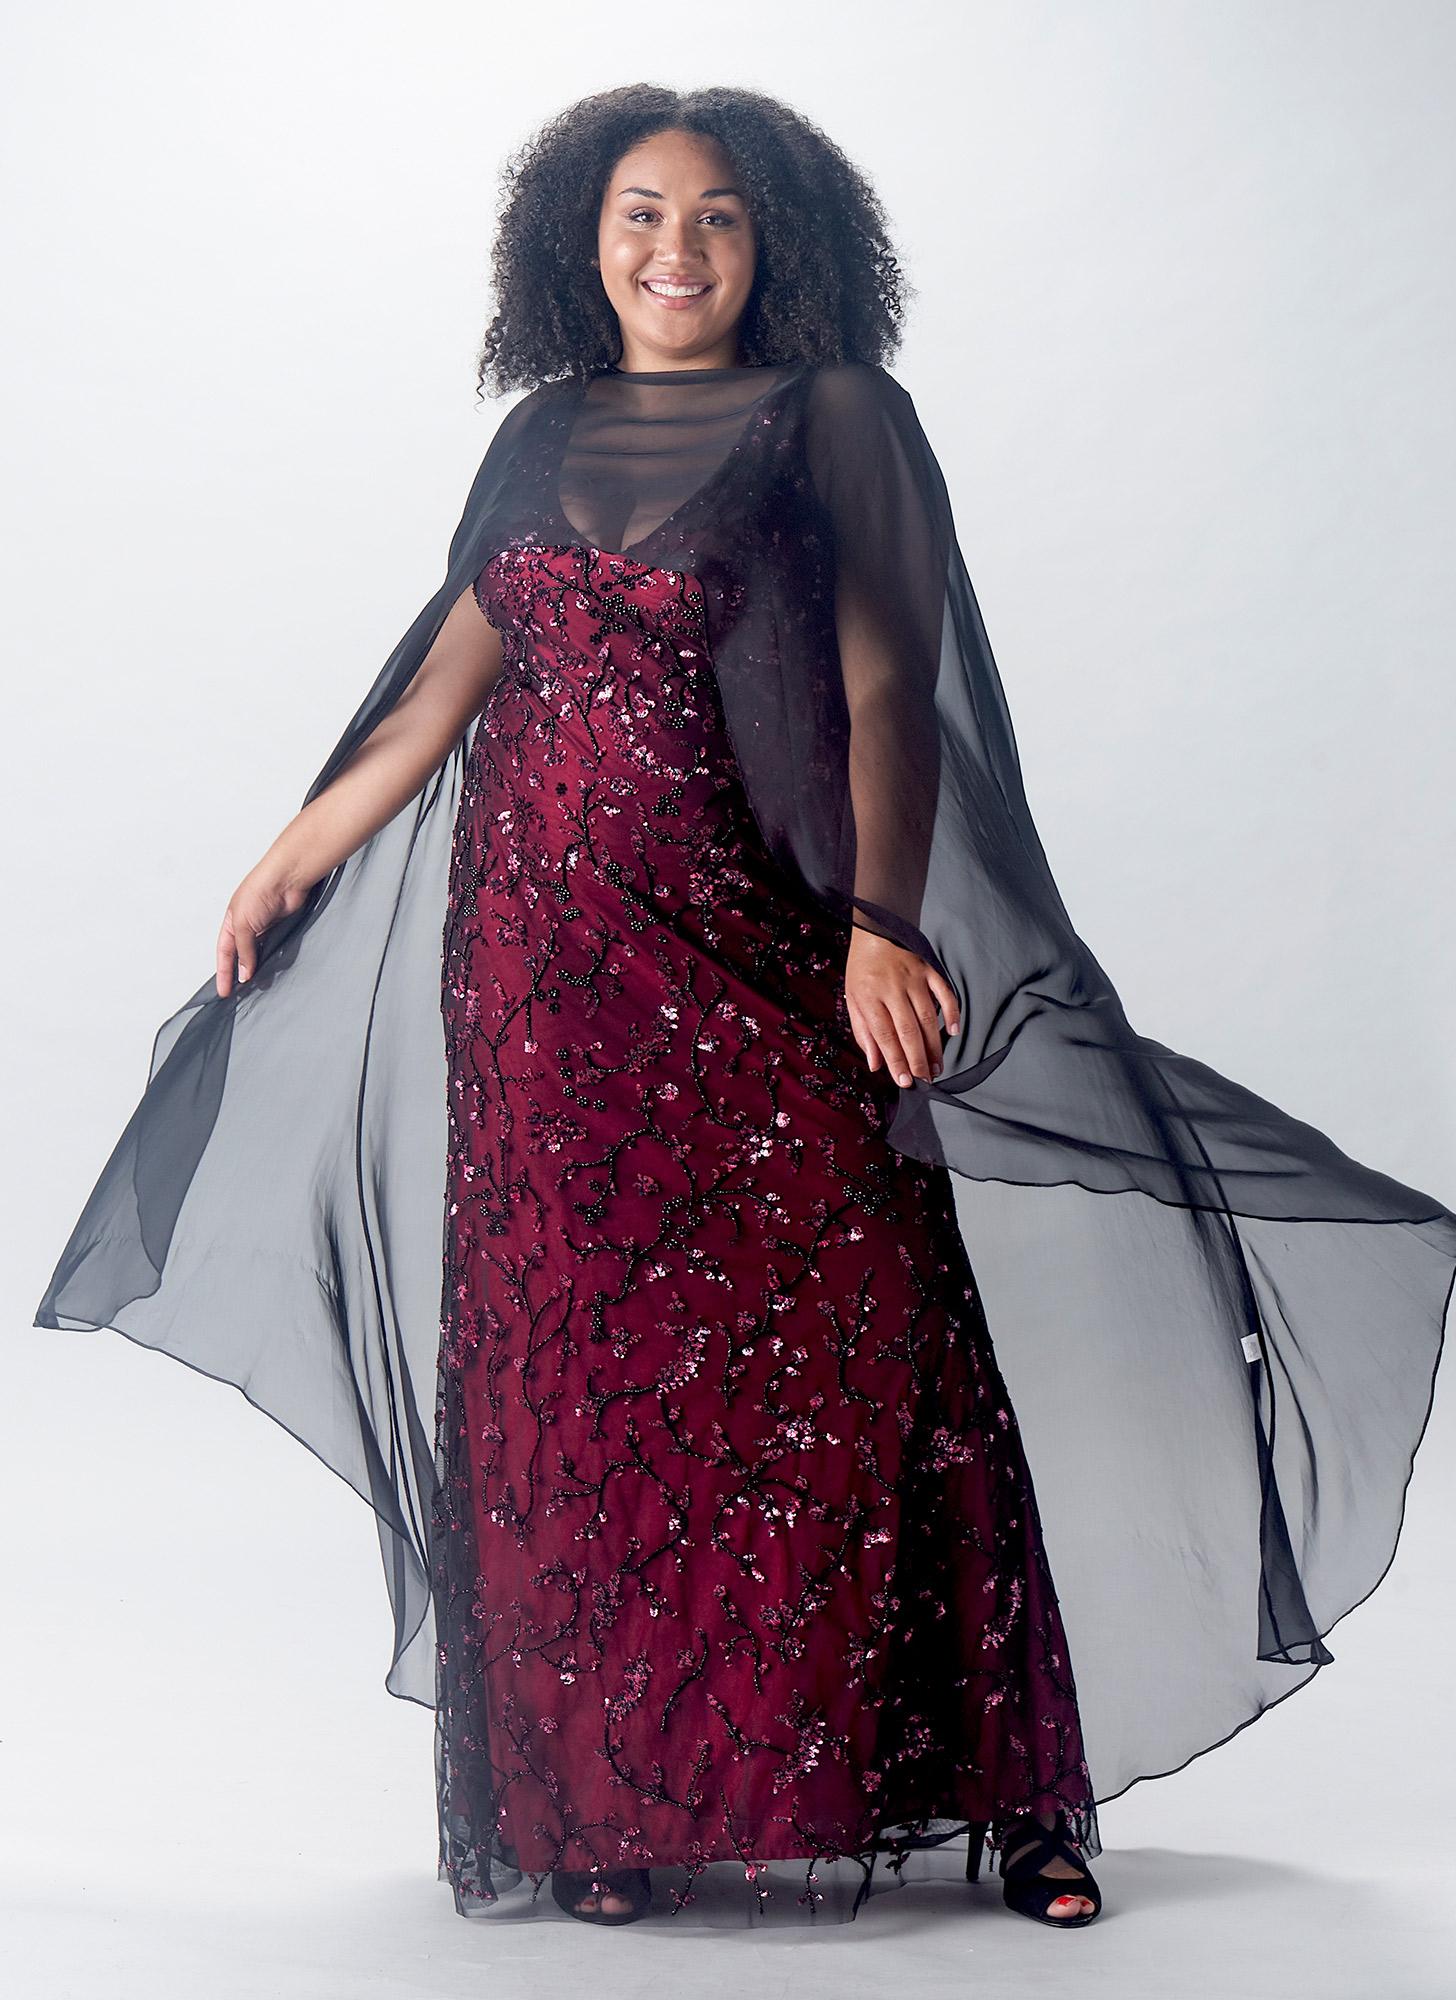 Get Curvy Beaded Dresses & Formal Bridal Attire From This NYC Gown Boutique